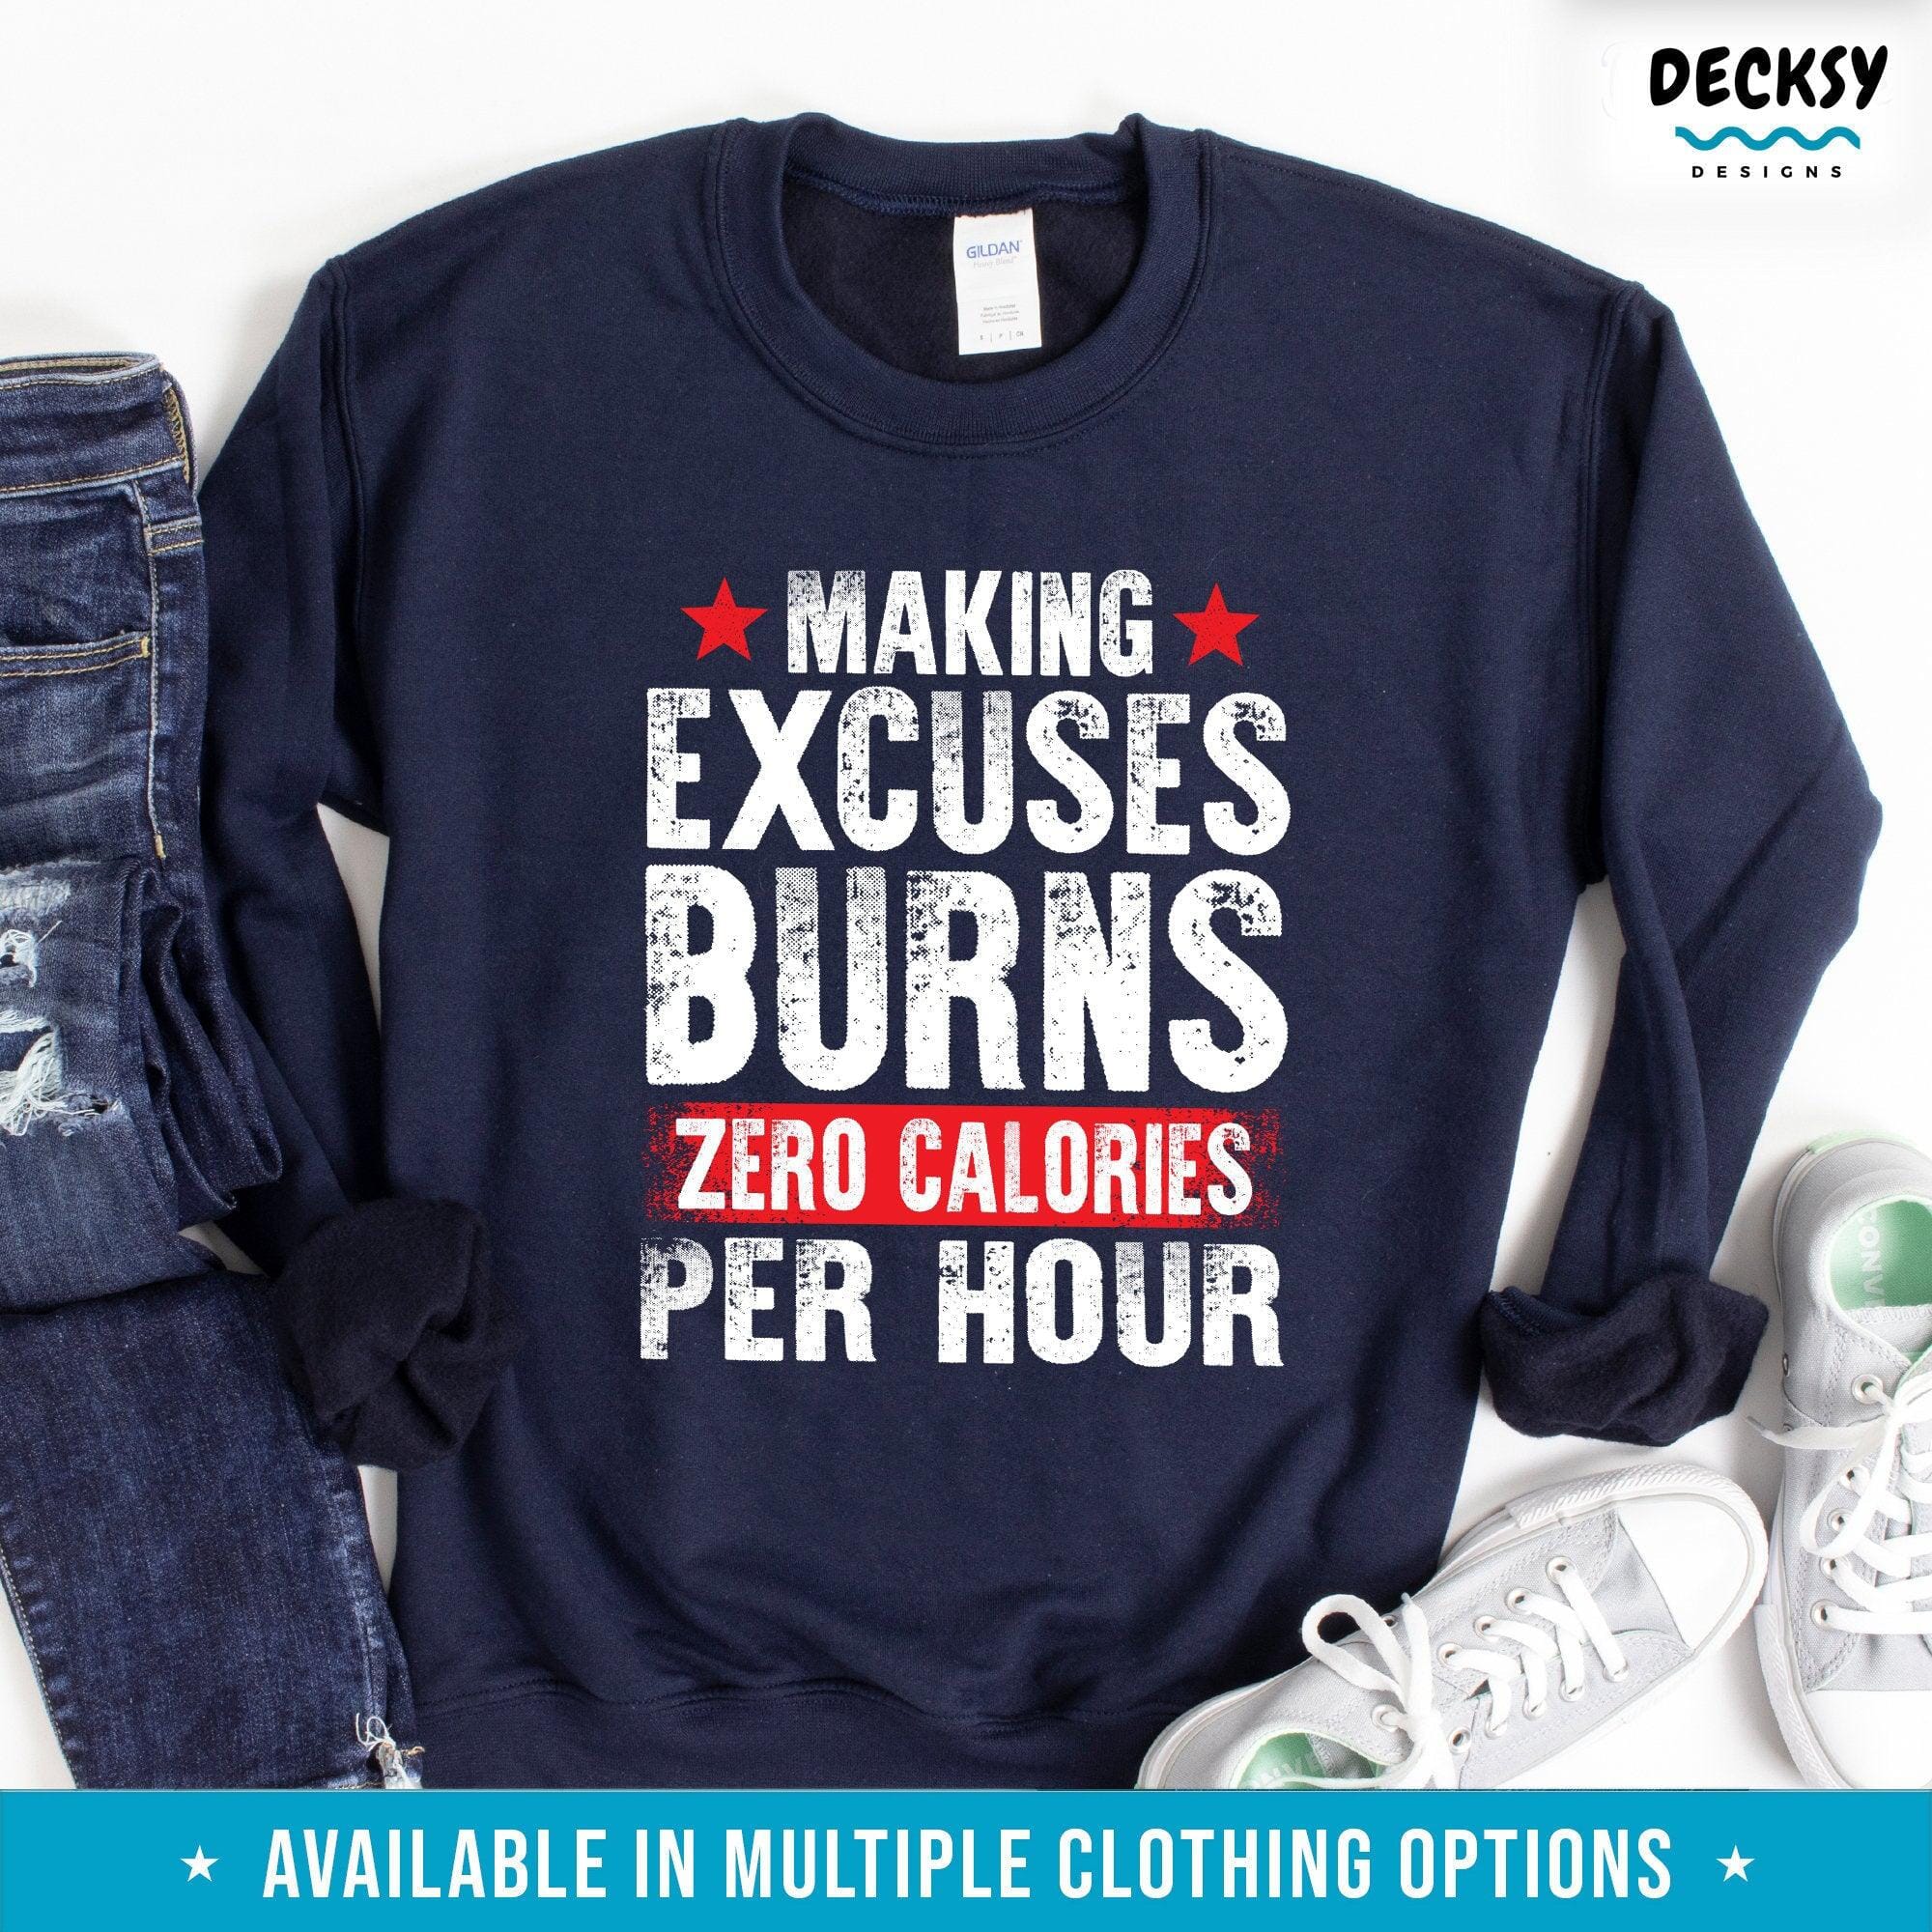 Exercising Tshirt, Workout Buddy Gift-Clothing:Gender-Neutral Adult Clothing:Tops & Tees:T-shirts:Graphic Tees-DecksyDesigns